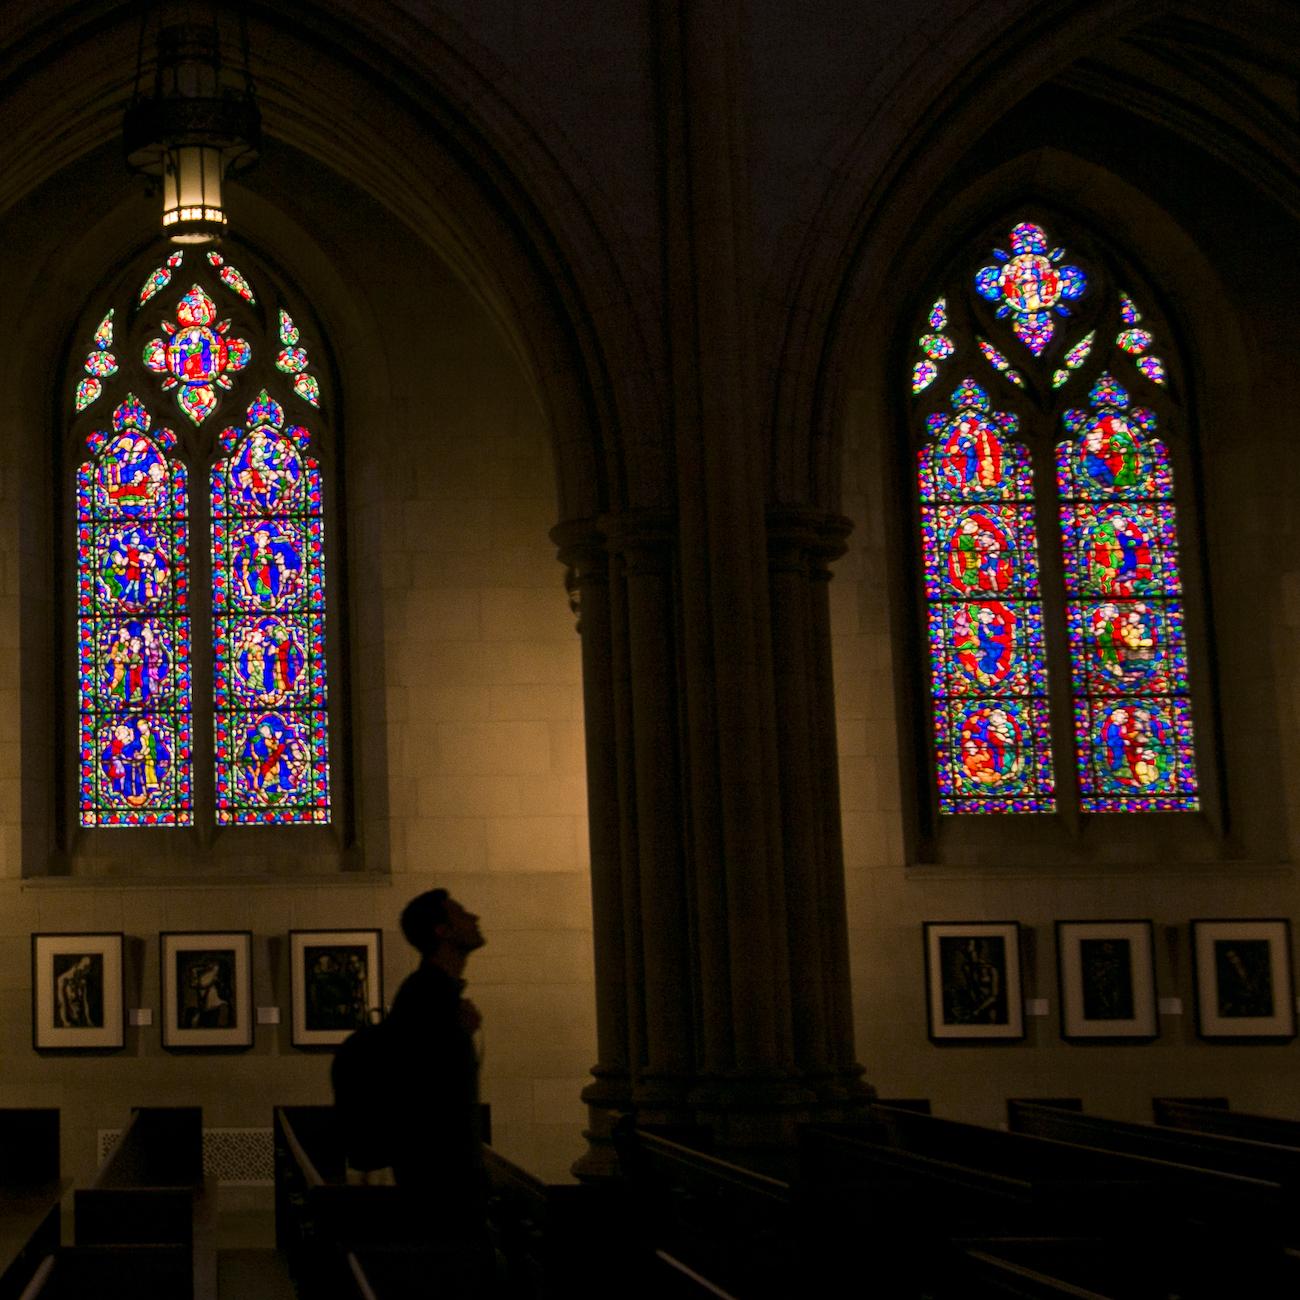 Student in shadows of Duke Chapel with three arched stained glass windows in background.